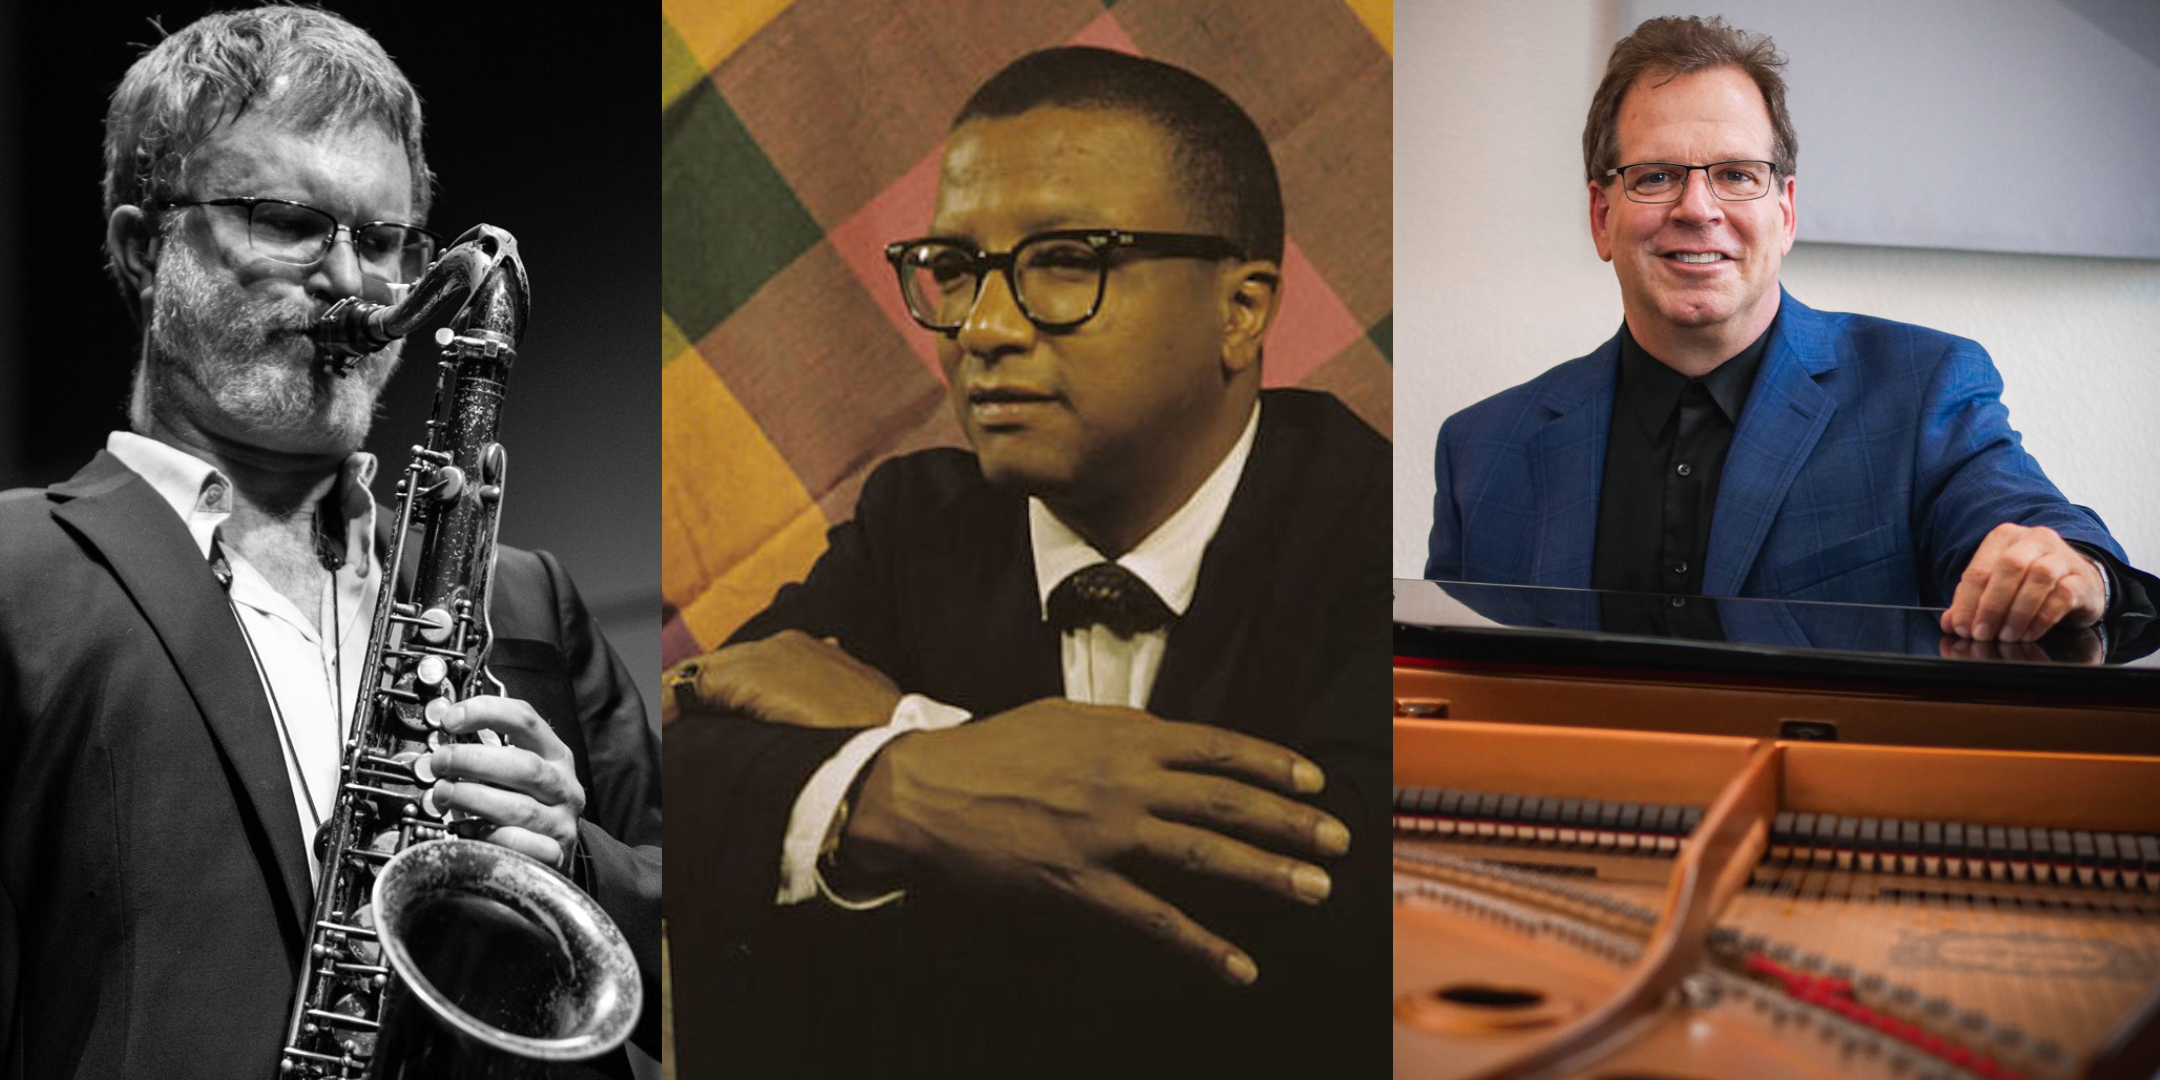 Brent Gallaher and Matt Harris: A Tribute to Billy Strayhorn